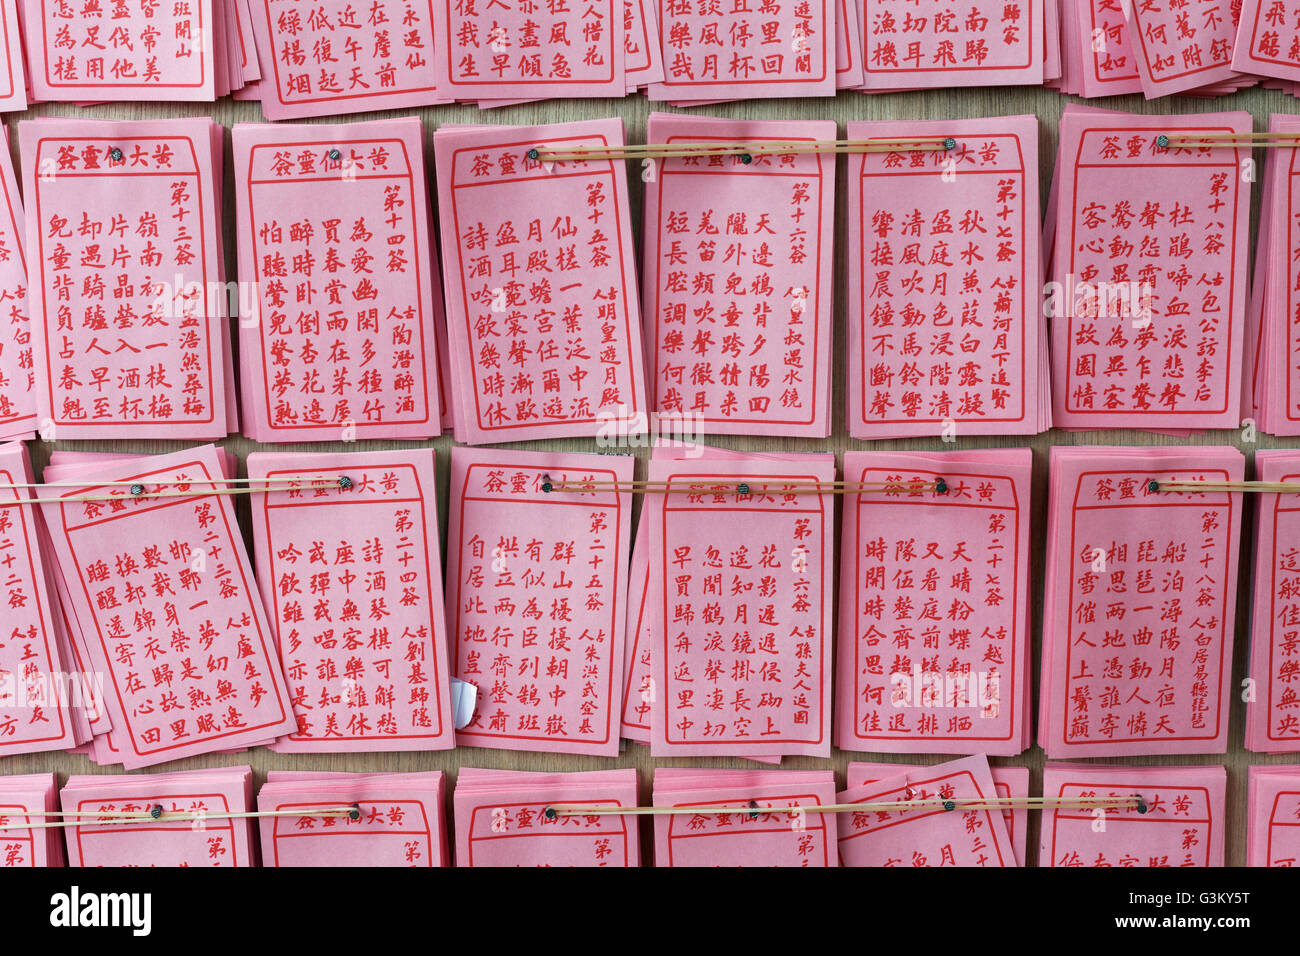 Pink Horoscope paper with Chinese writing, for sale, Sik Sik Yuen Wang Tai Sin Temple, Kowloon, Hong Kong, China Stock Photo